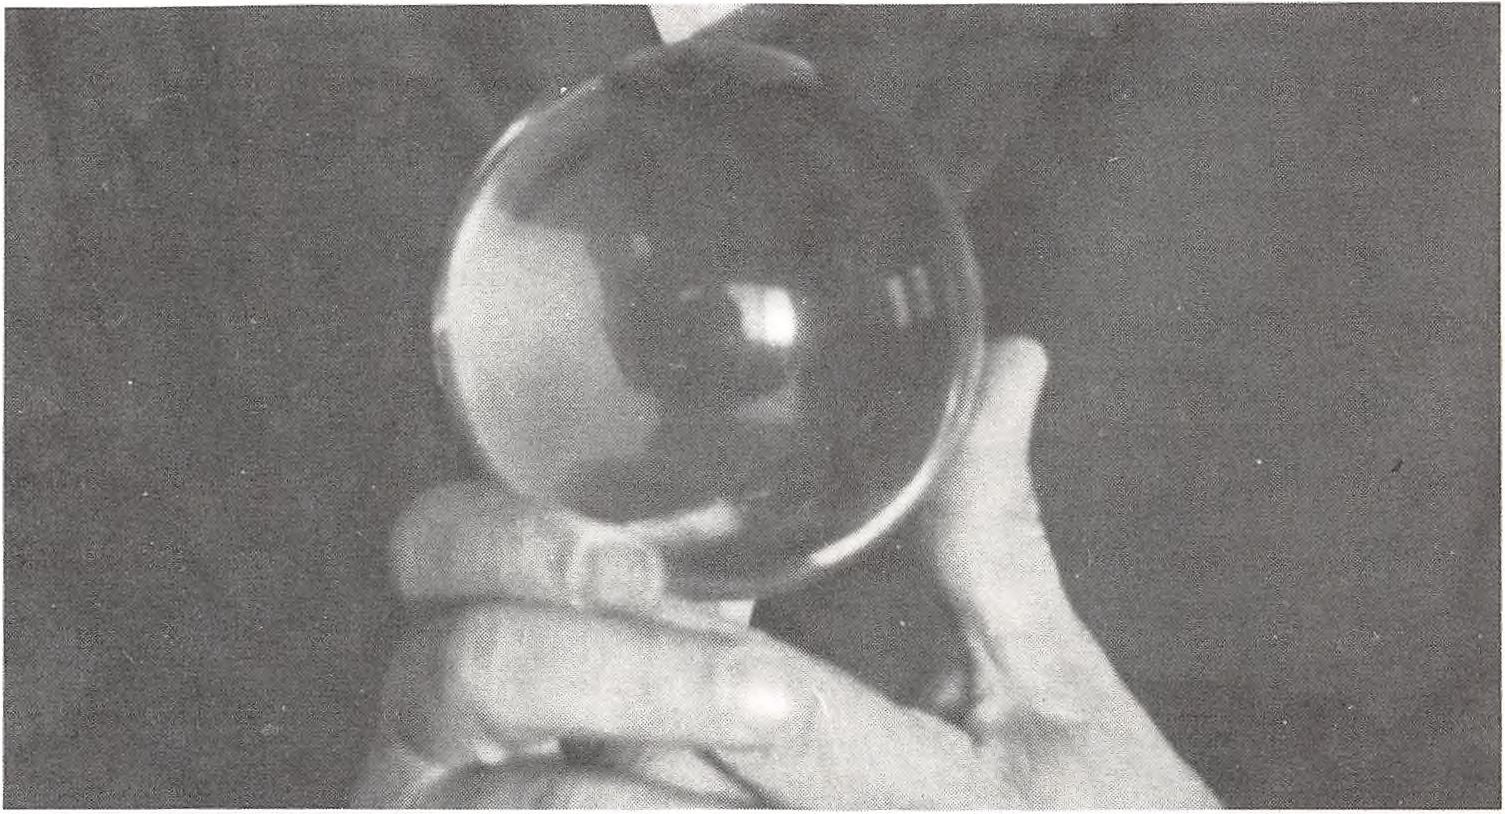 Dr Rampa with his crystal ball.